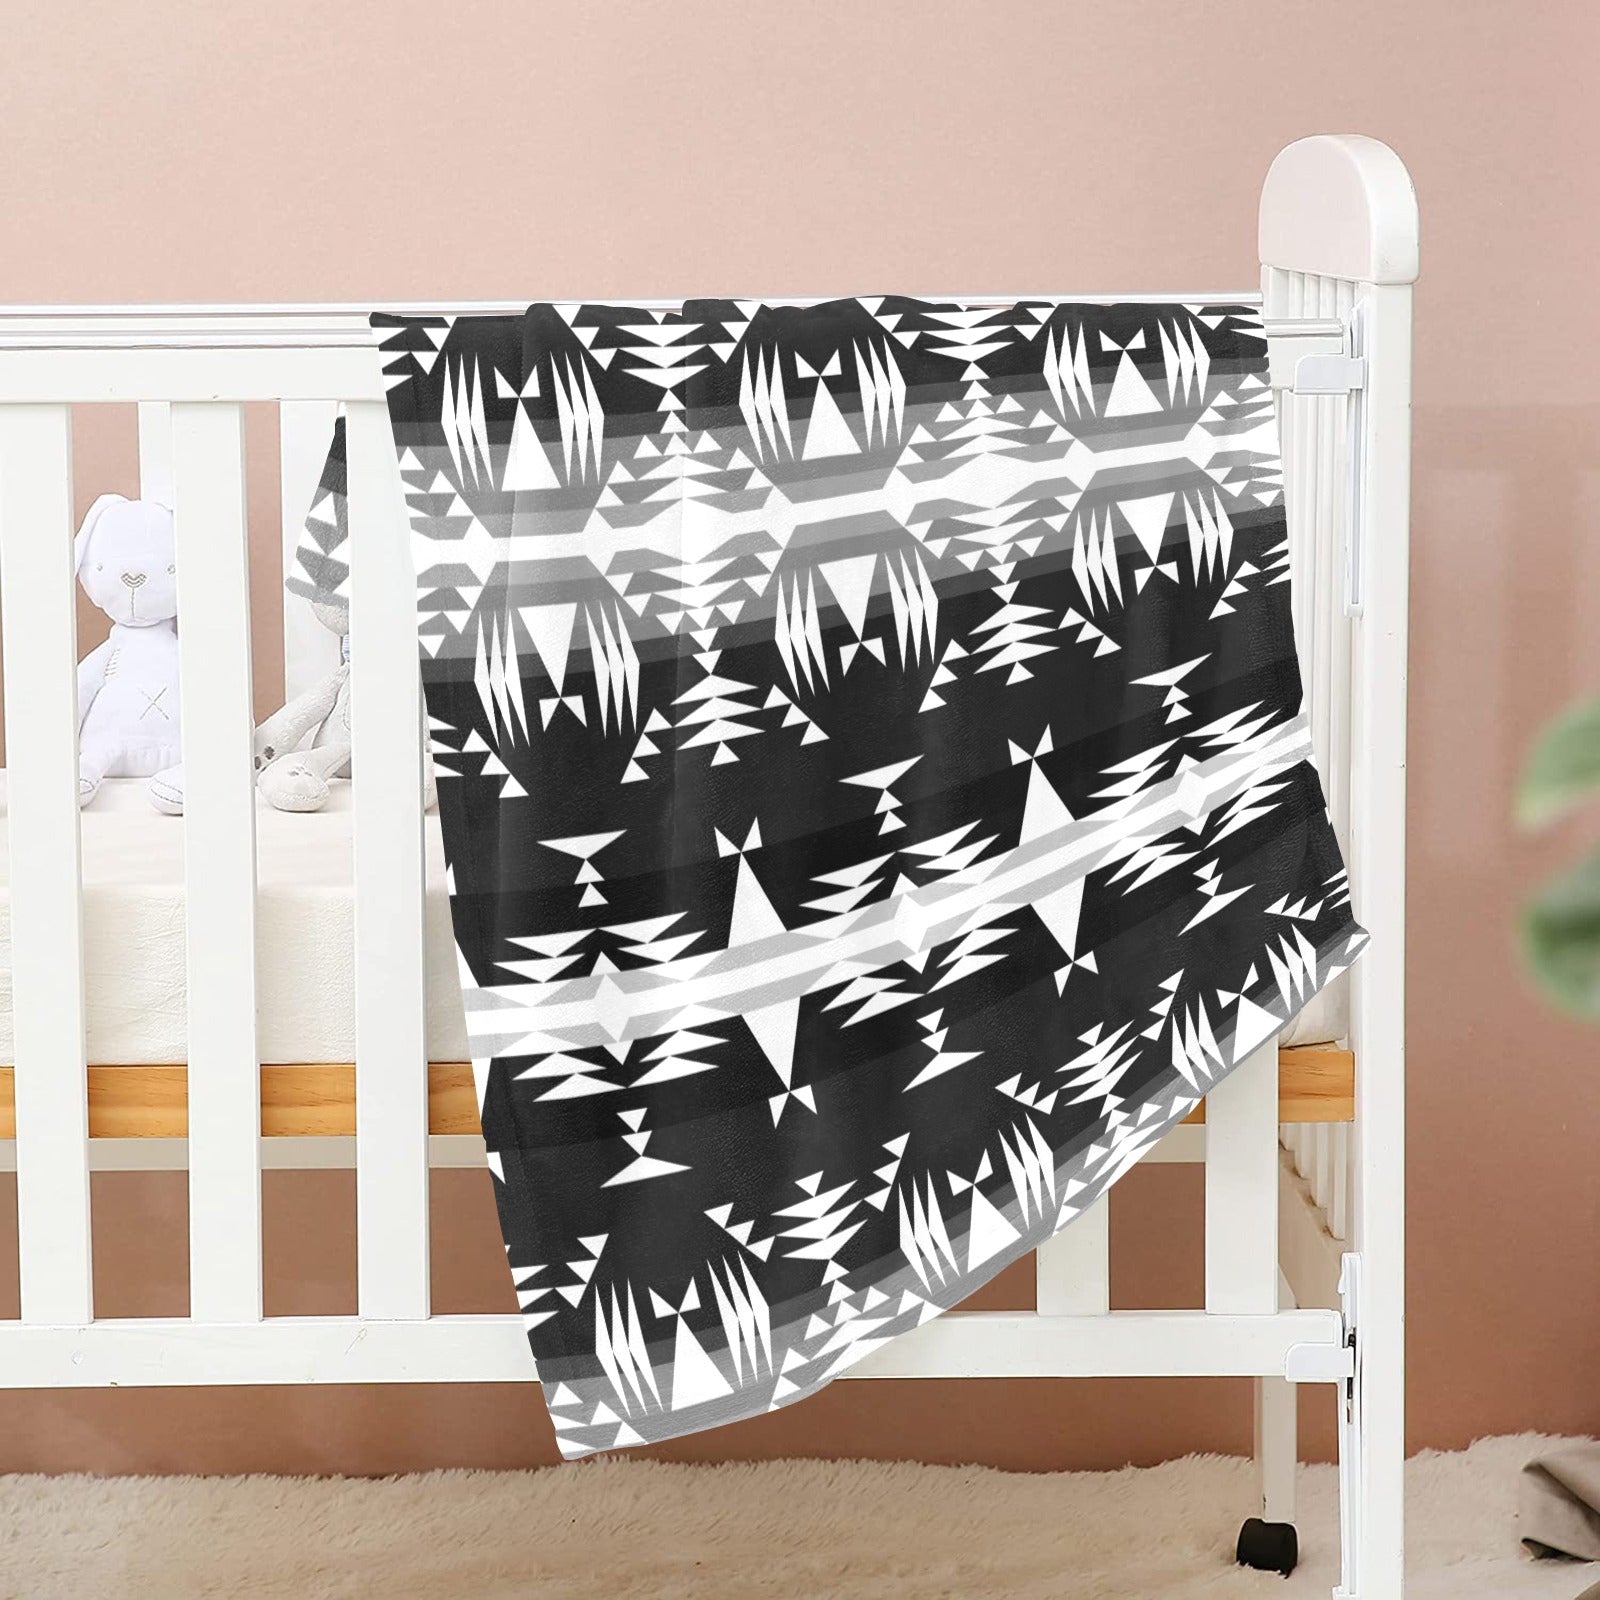 Between the Mountains Black and White Baby Blanket 30"x40" Baby Blanket 30"x40" e-joyer 